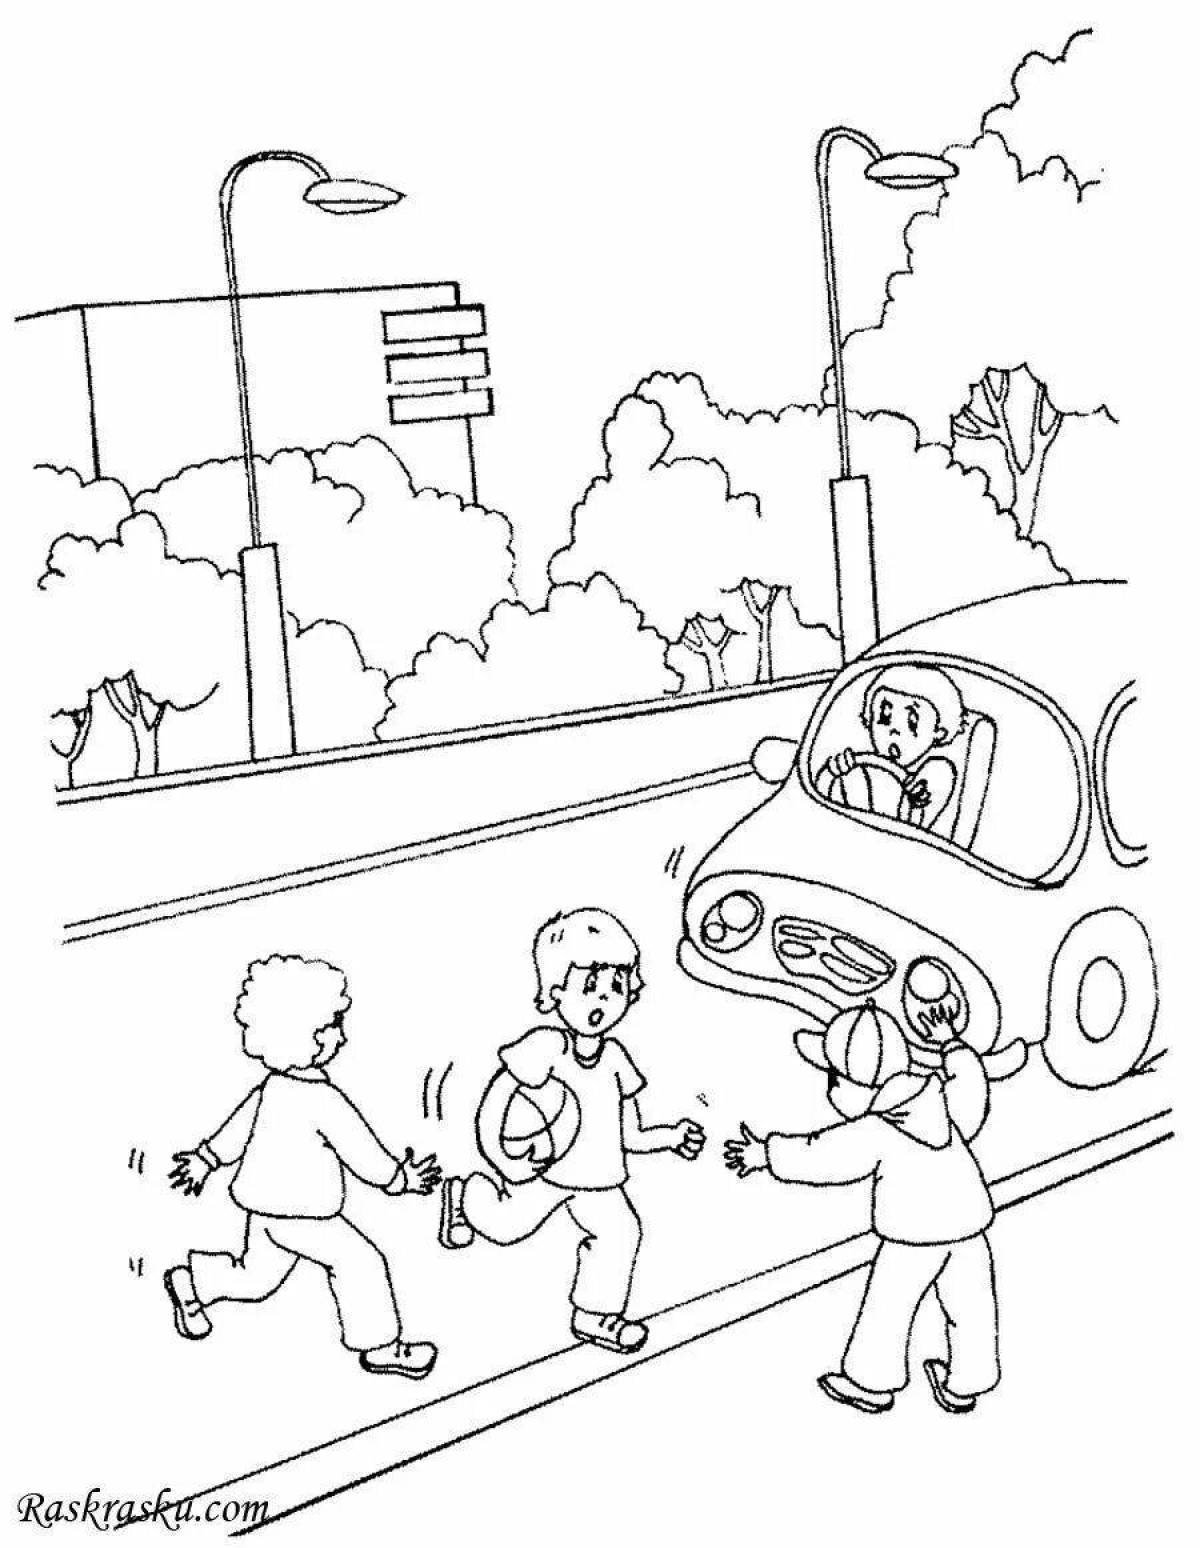 Amazing winter road coloring page for kids